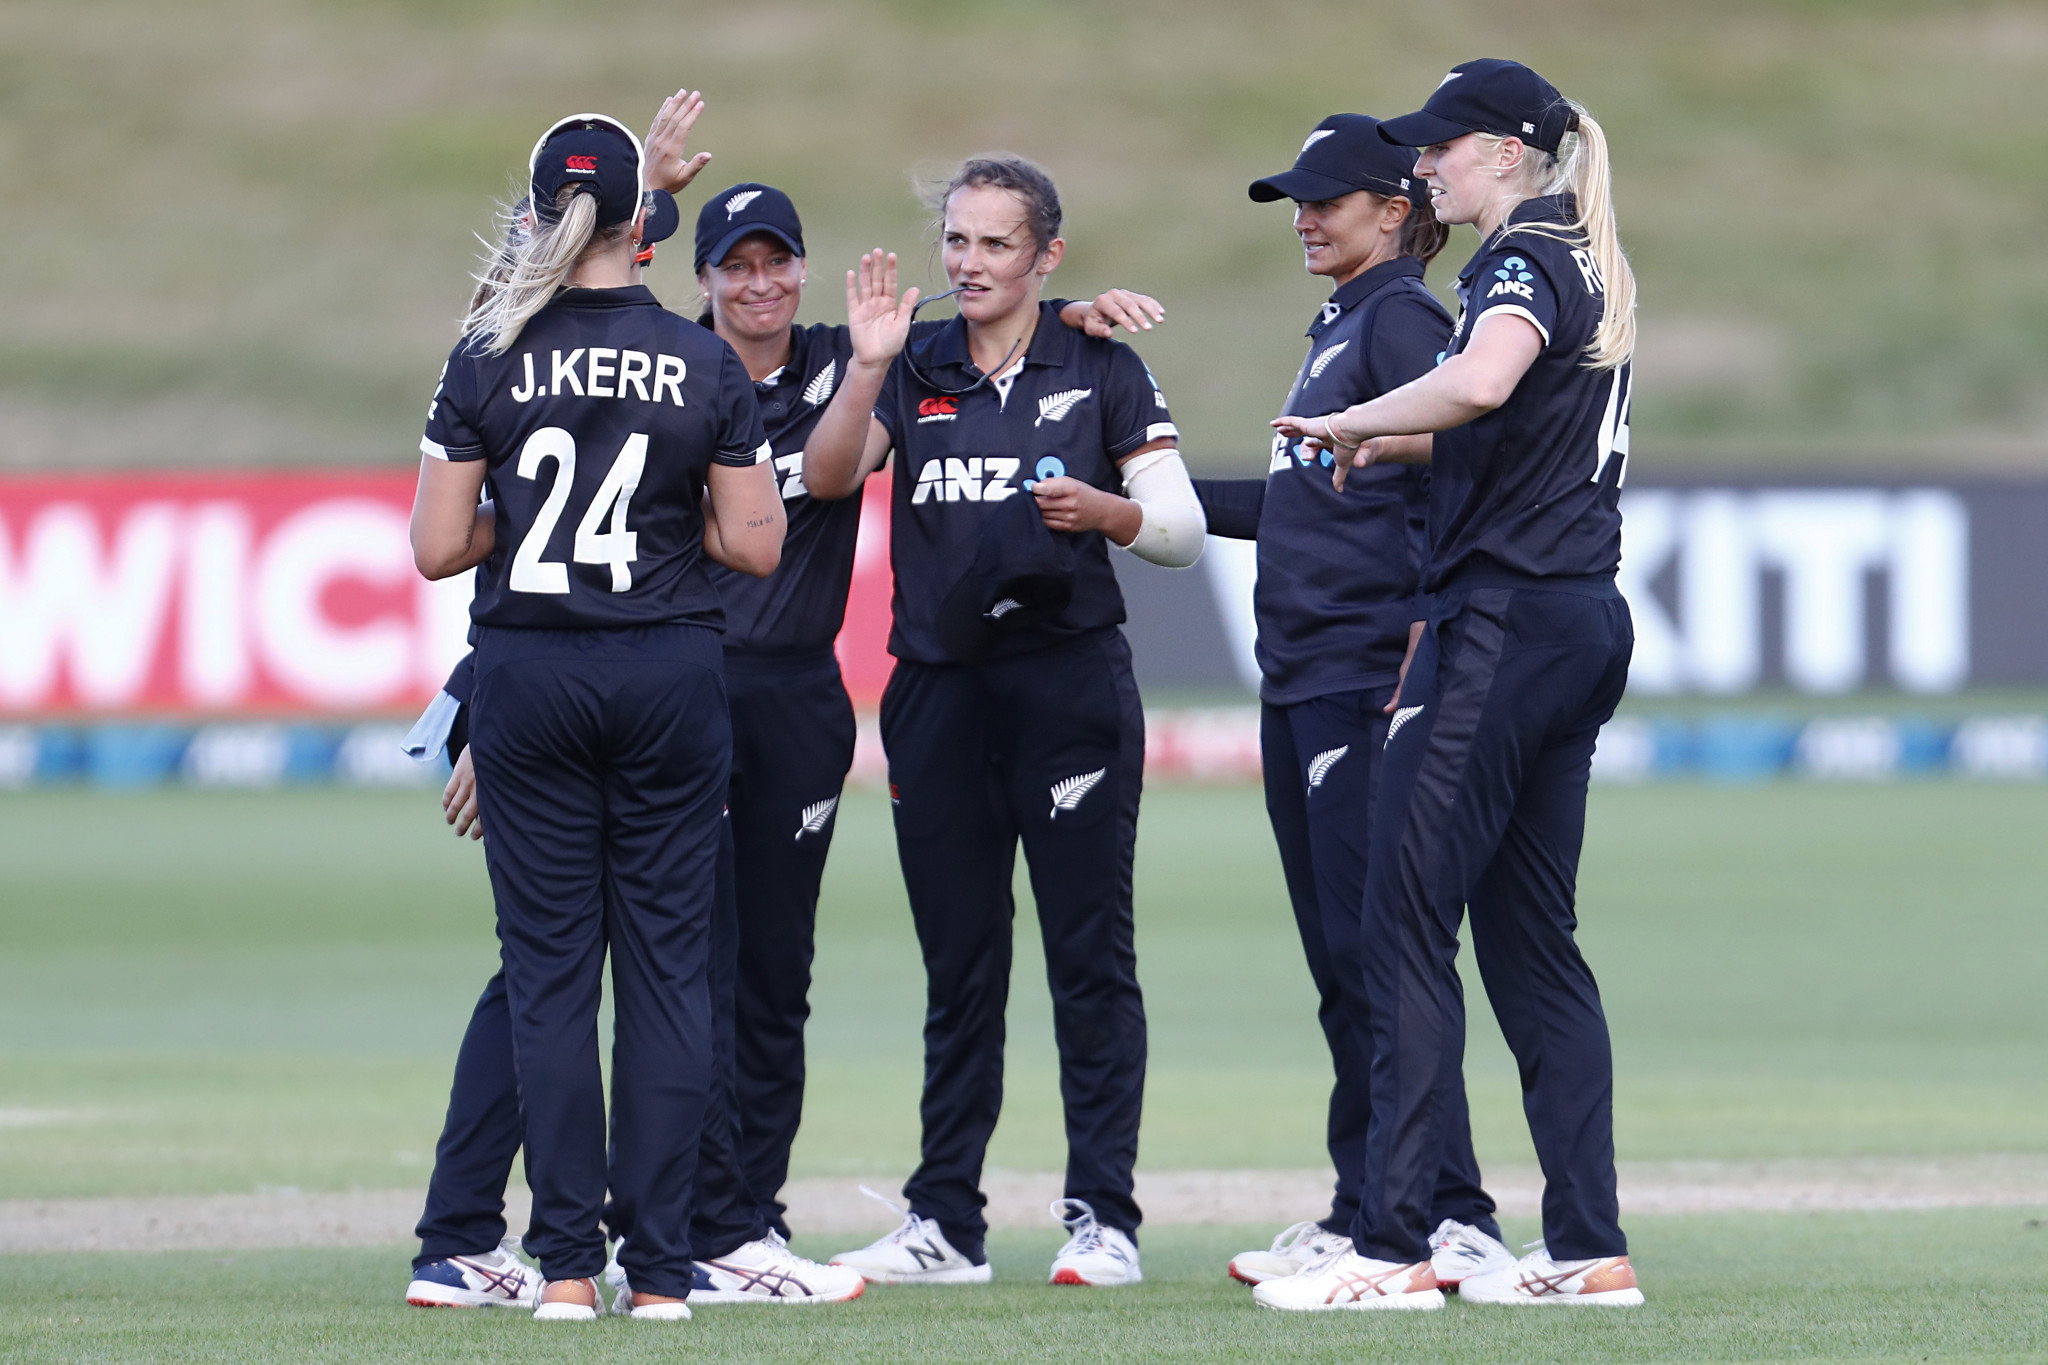 White Ferns captain Sophie Devine described equal pay for the country's men's and women's teams as 